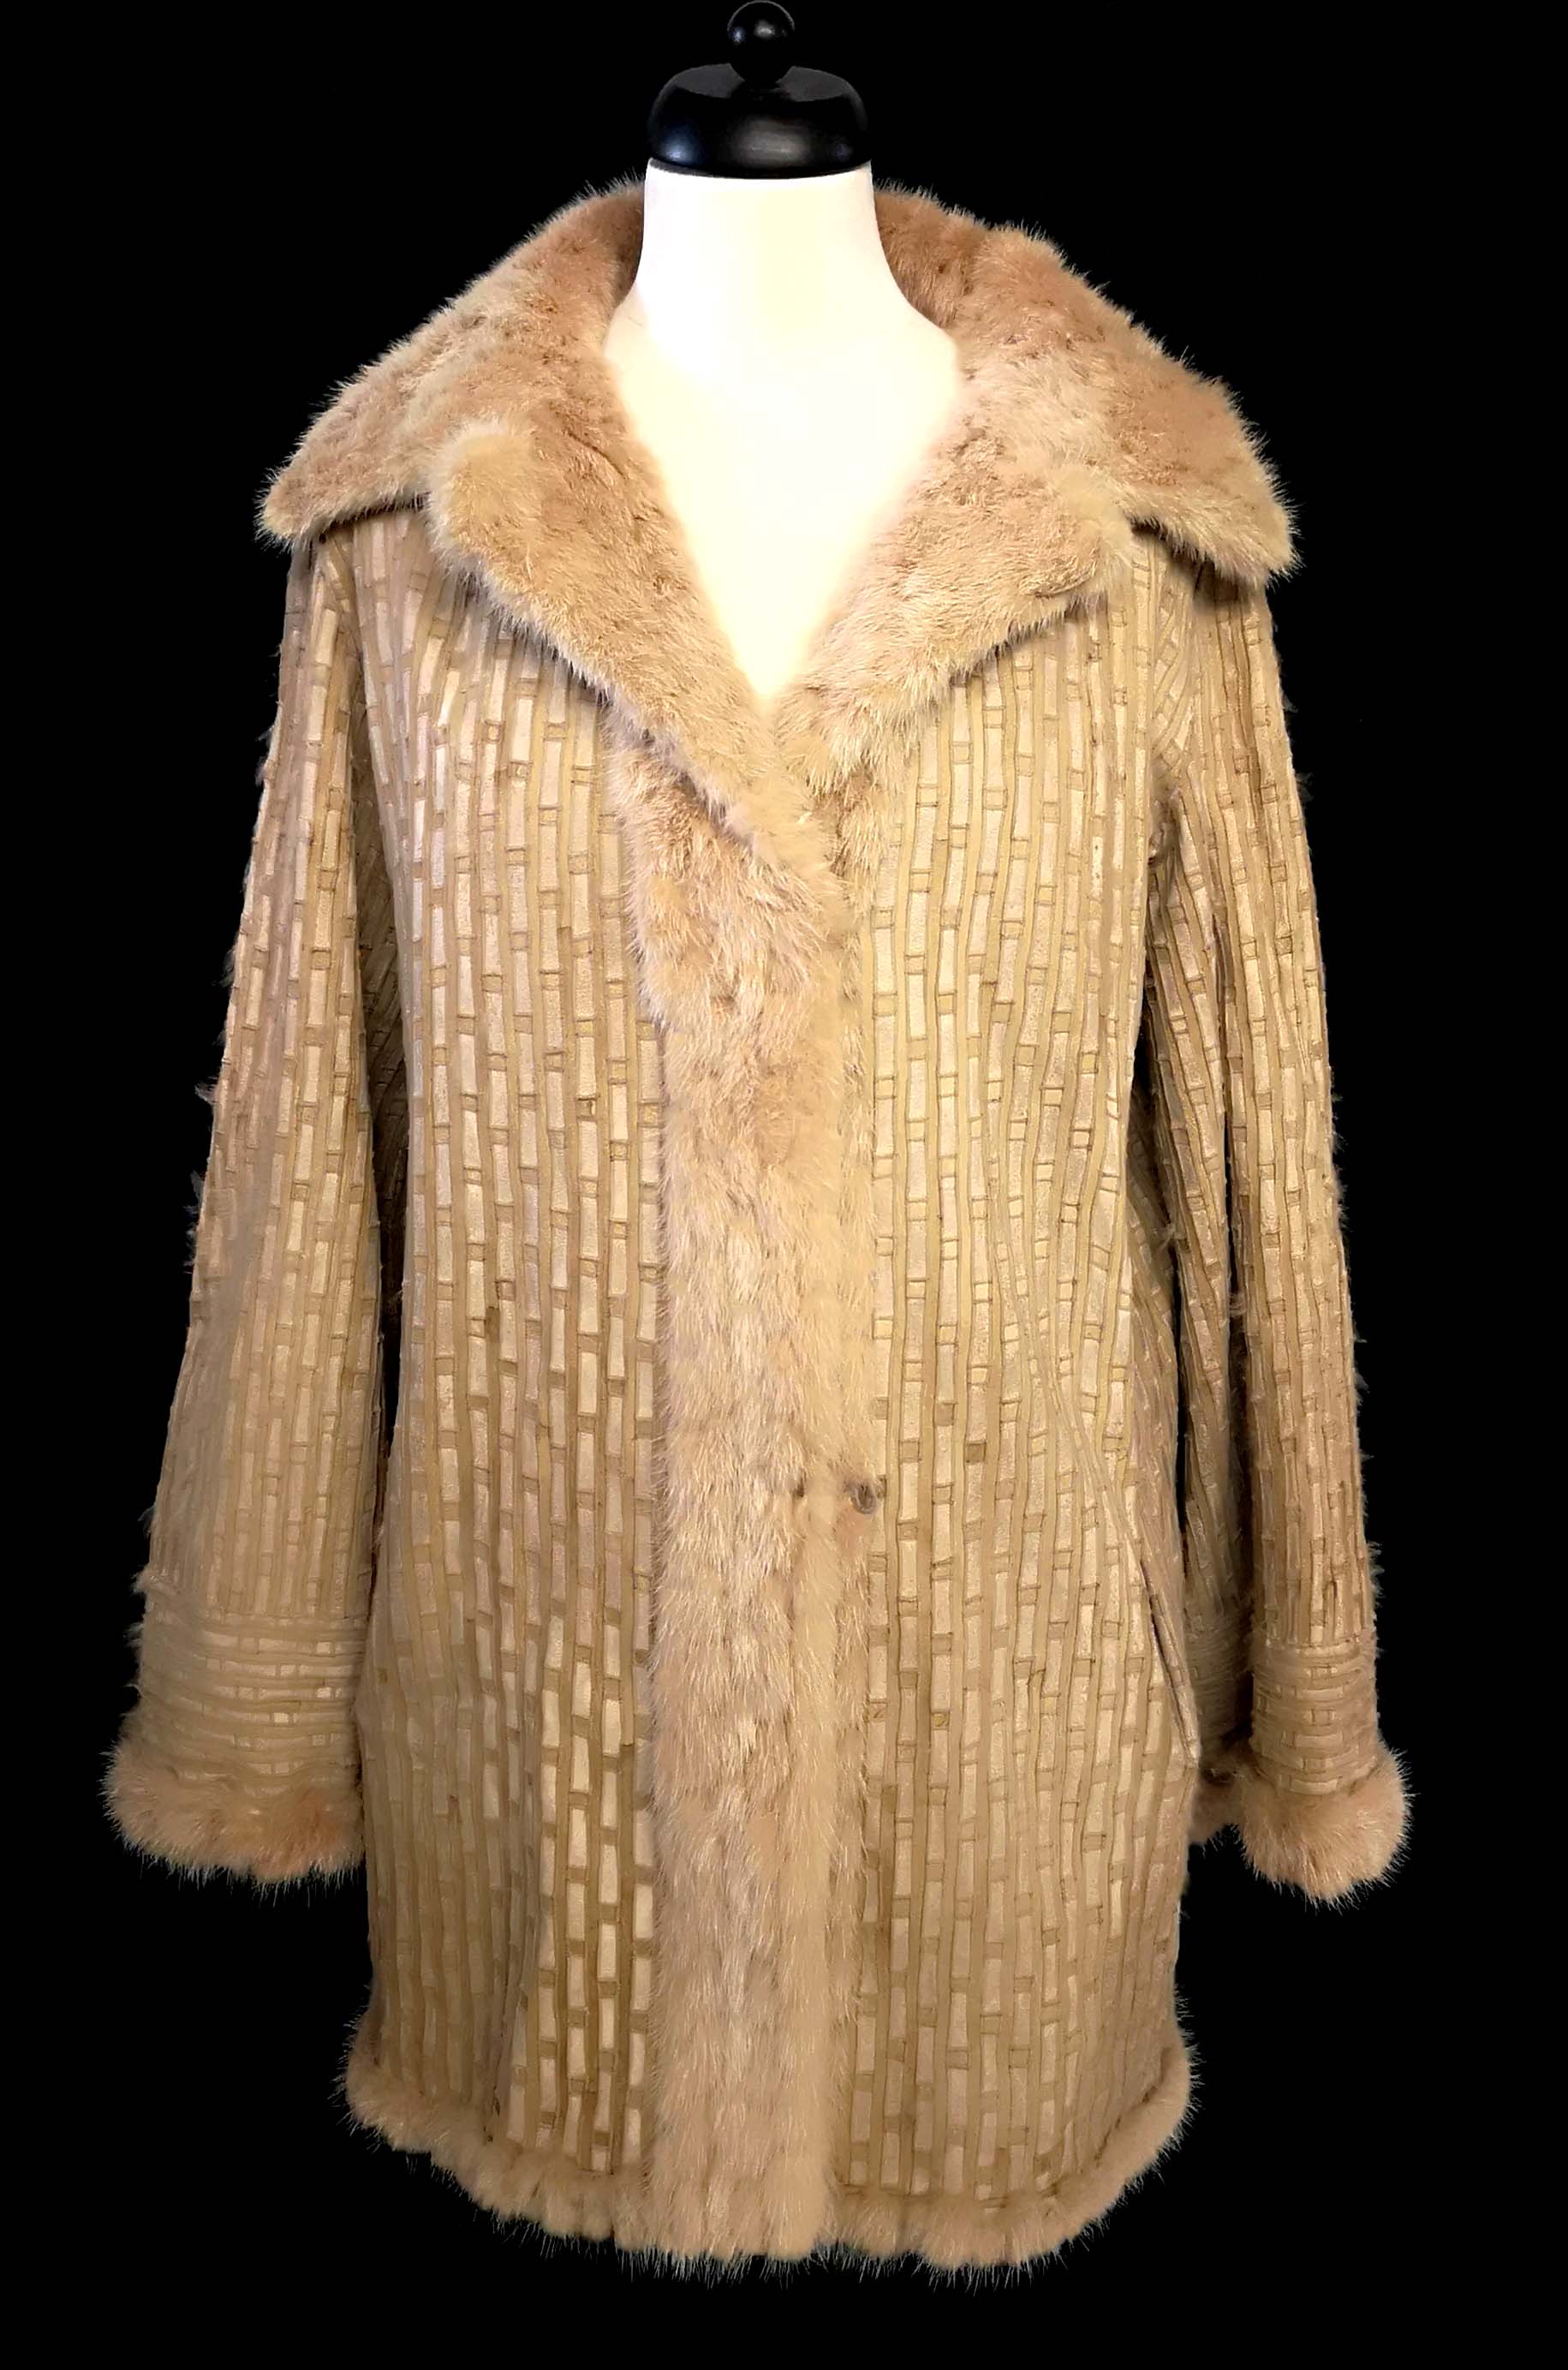 A VINTAGE BEIGE MINK SHORT COAT Fully reversible with a patchwork leather effect to one side. - Image 3 of 3